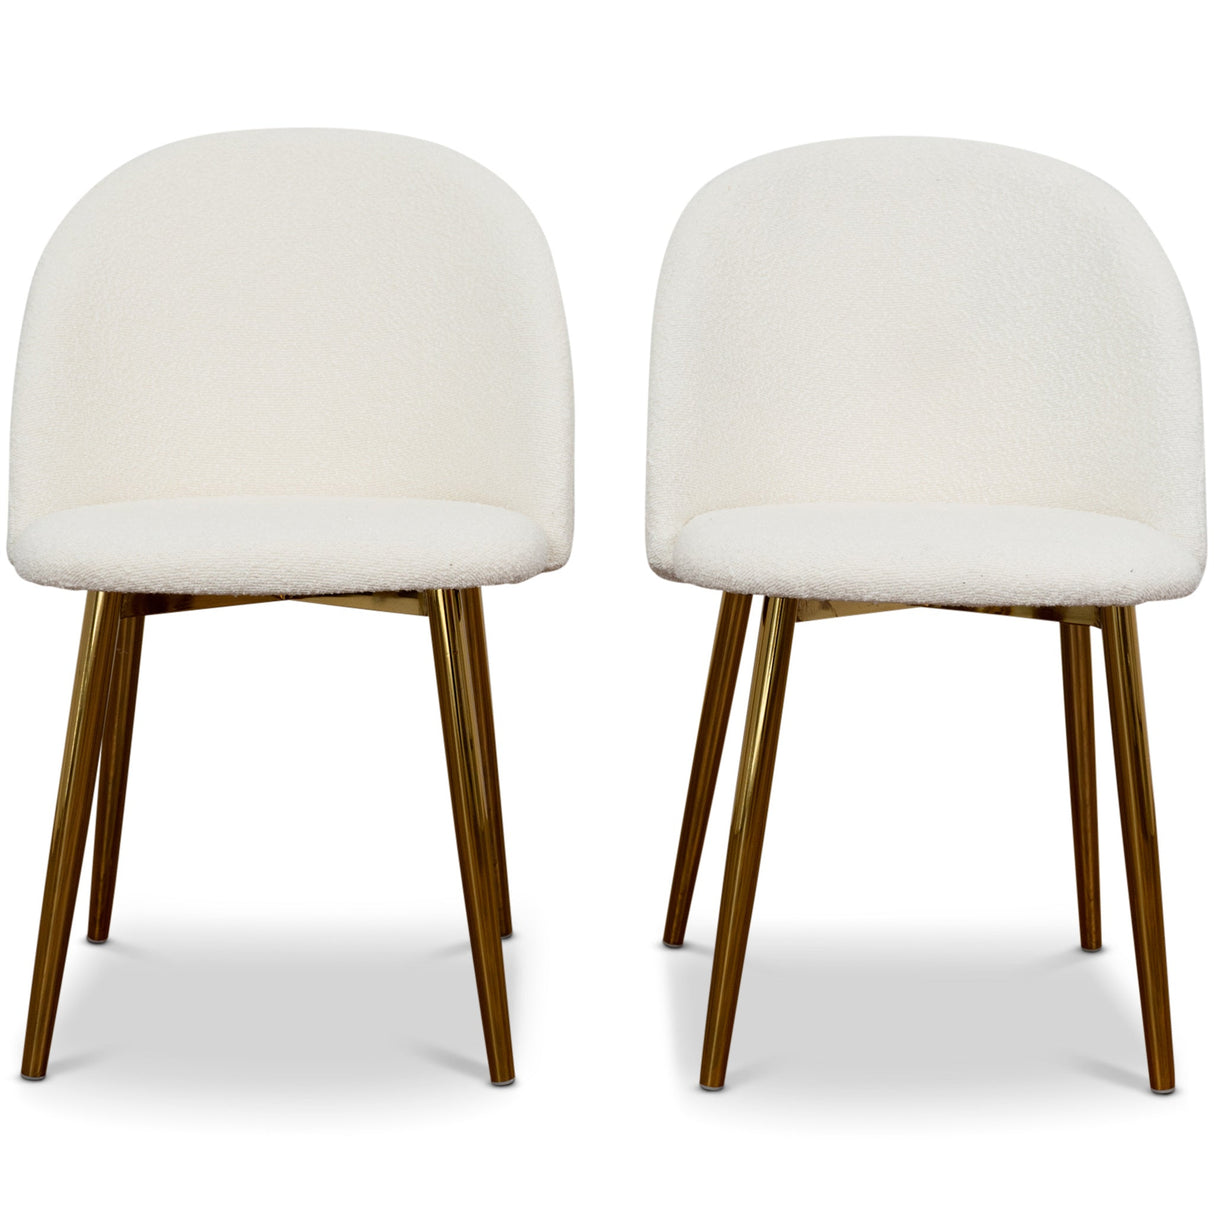 Marion Mid Century Modern Dining Chair (Set of 2) Cream Boucle